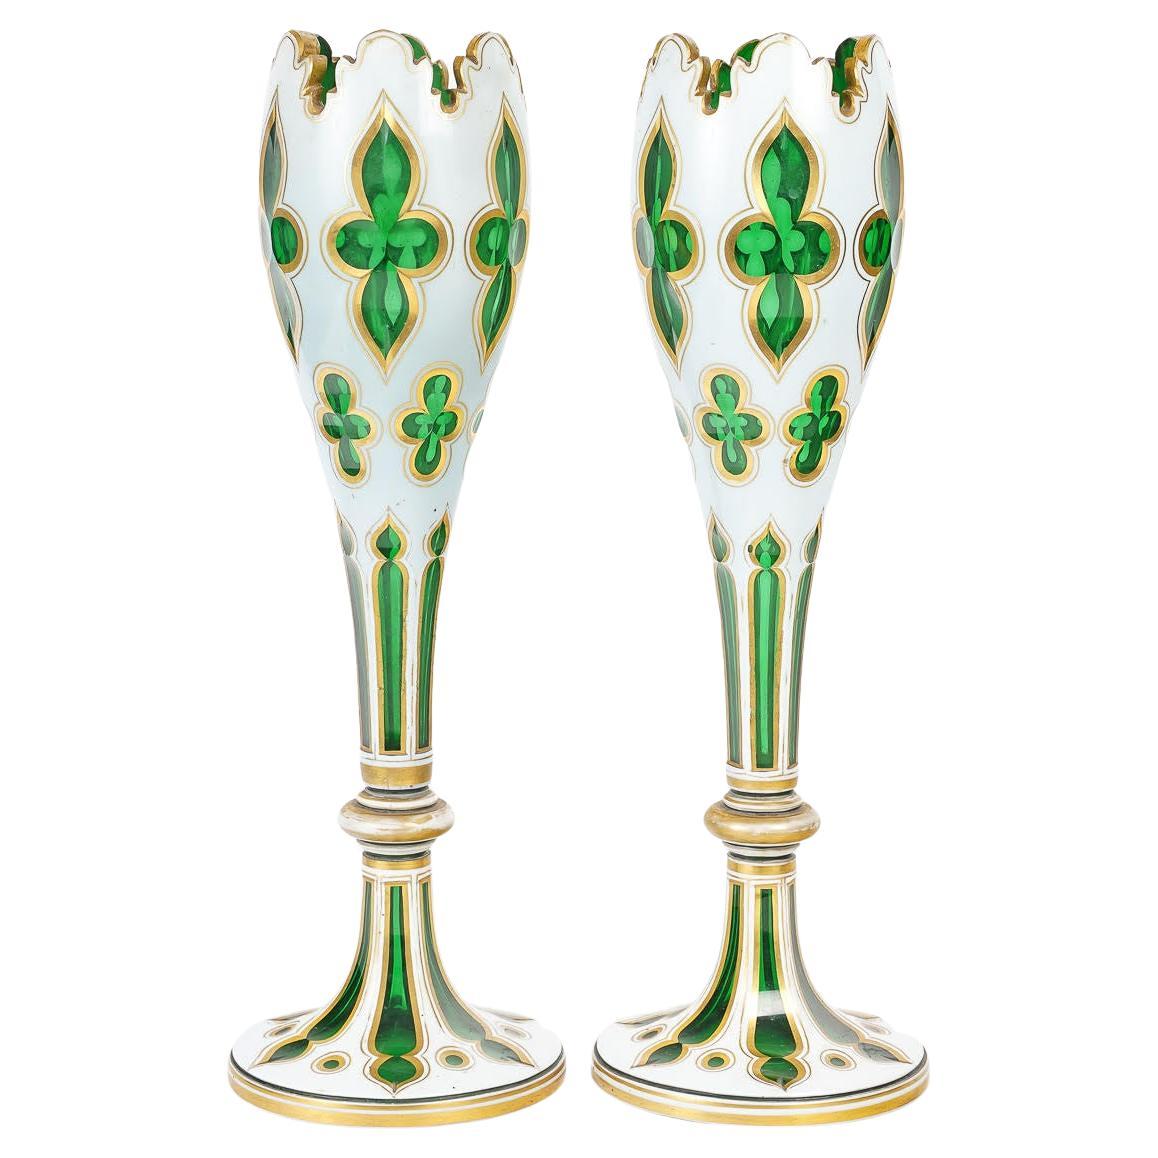 Pair Of 19th Century Bohemian Cut Glass Decanters For Sale At 1stdibs